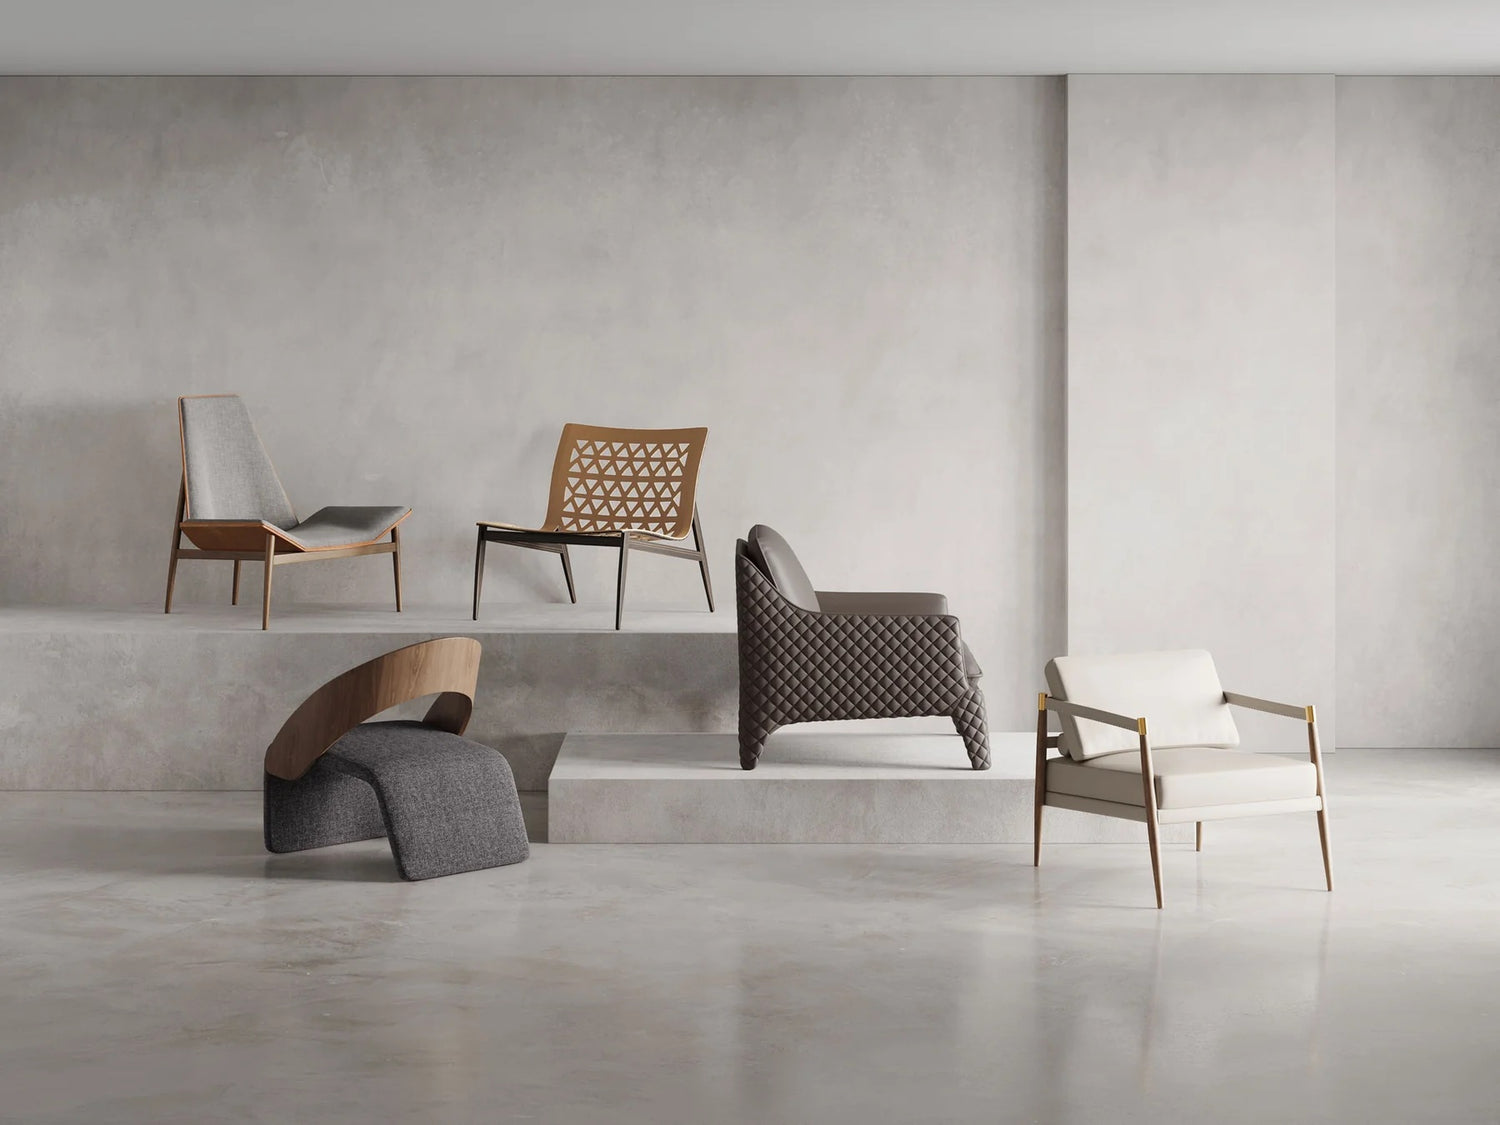 Five stylish chairs are displayed in a minimalist, staged setting with a neutral-toned backdrop. The chairs vary in design, materials, and colors, including wood, fabric, and leather, showcasing modern furniture design and aesthetics.